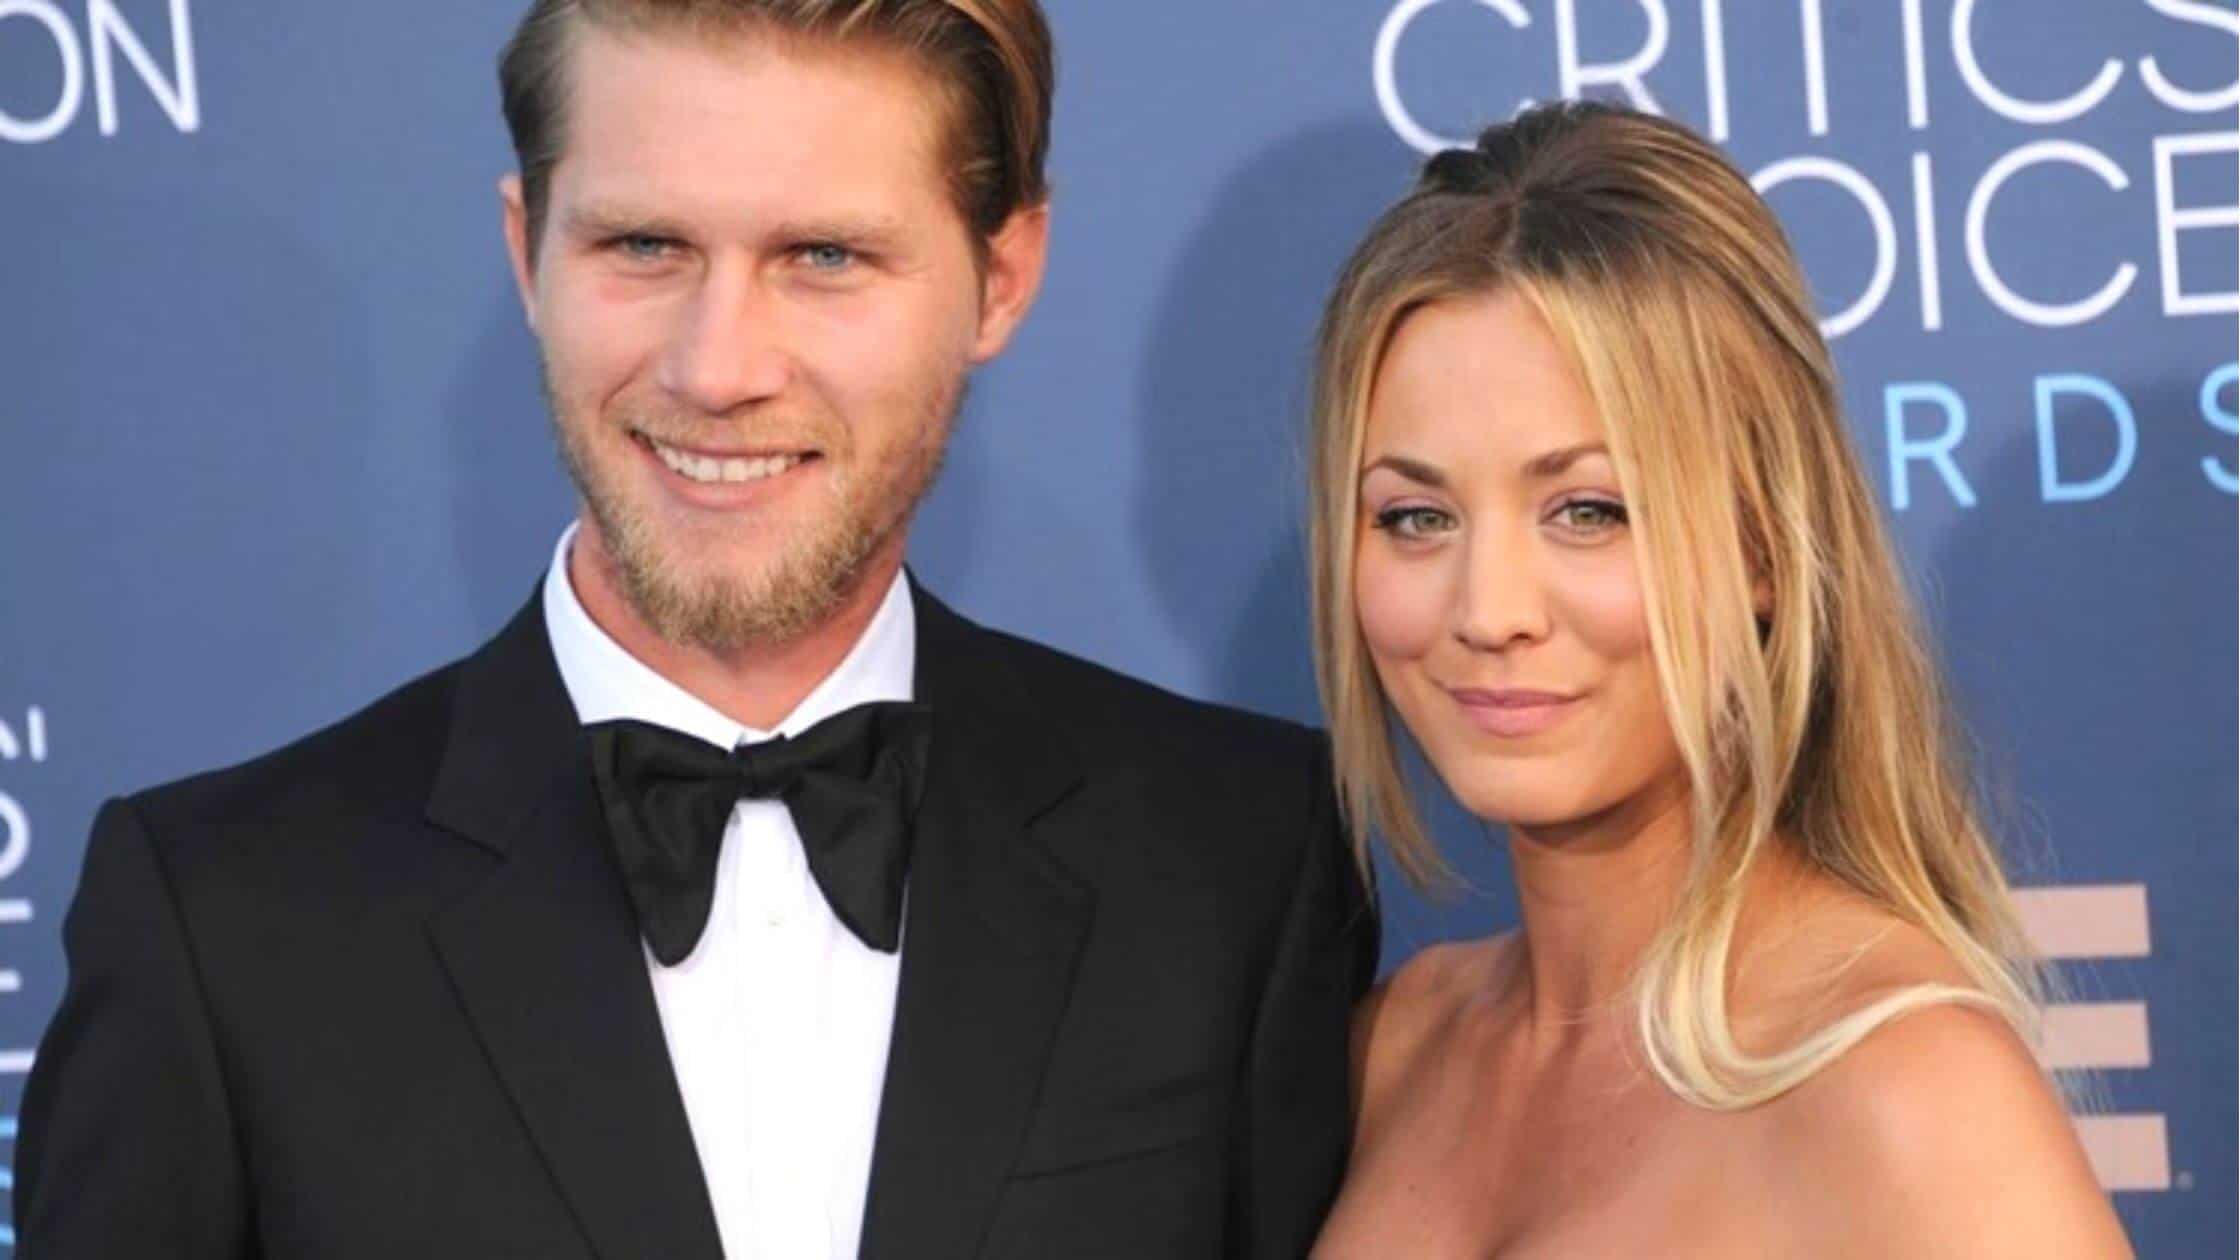 Karl Cook And Kaley Cuoco's Divorce Has Been Finalised